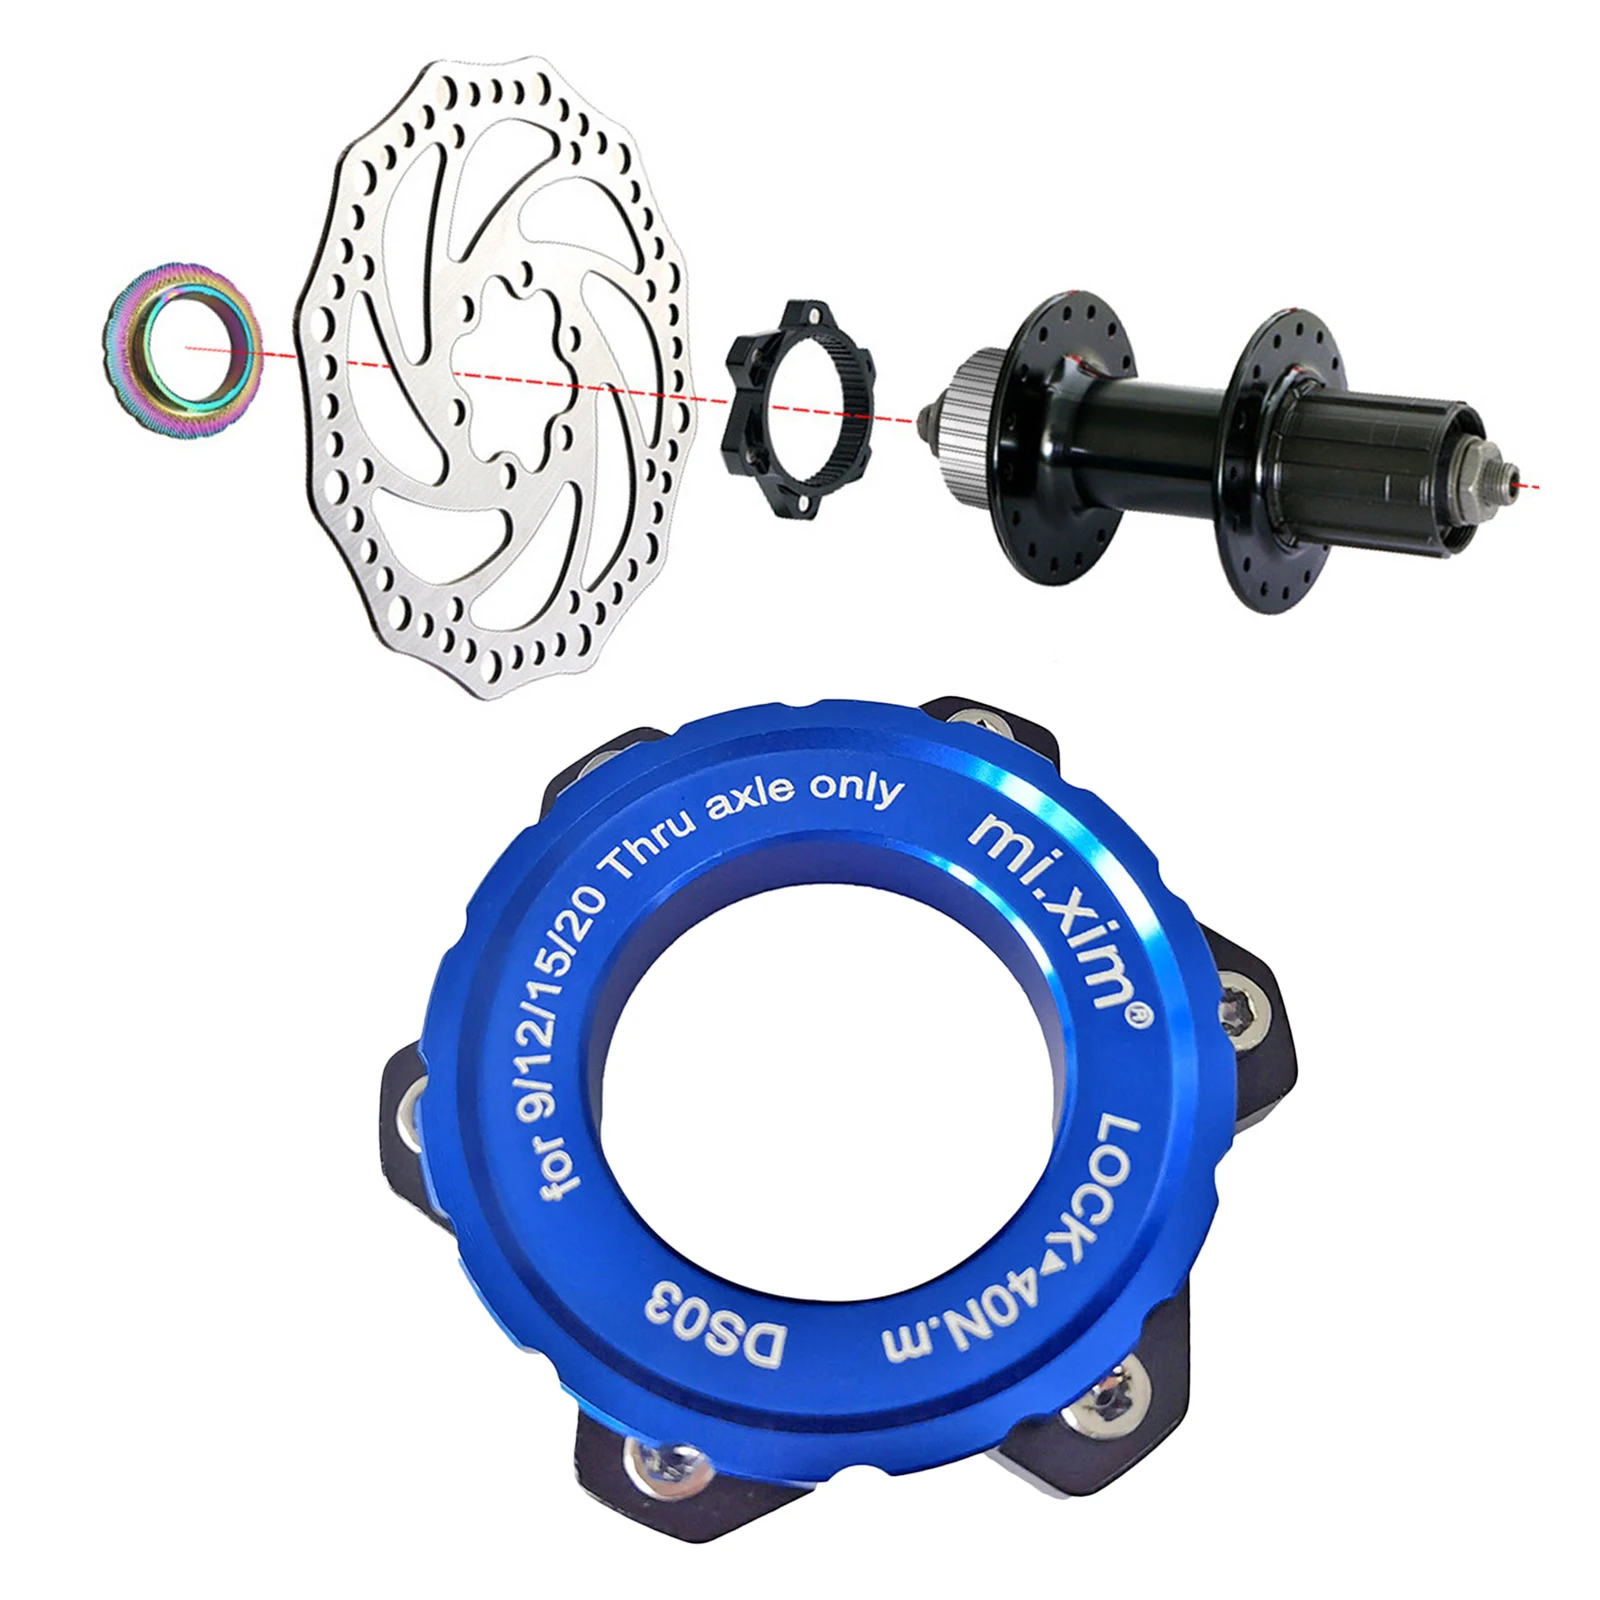 1pcs Mountain Bicycle Hub to 6-bolt Disc Adapter for Converting Center-lock Disc Brake Adapter Center Lock Conversion